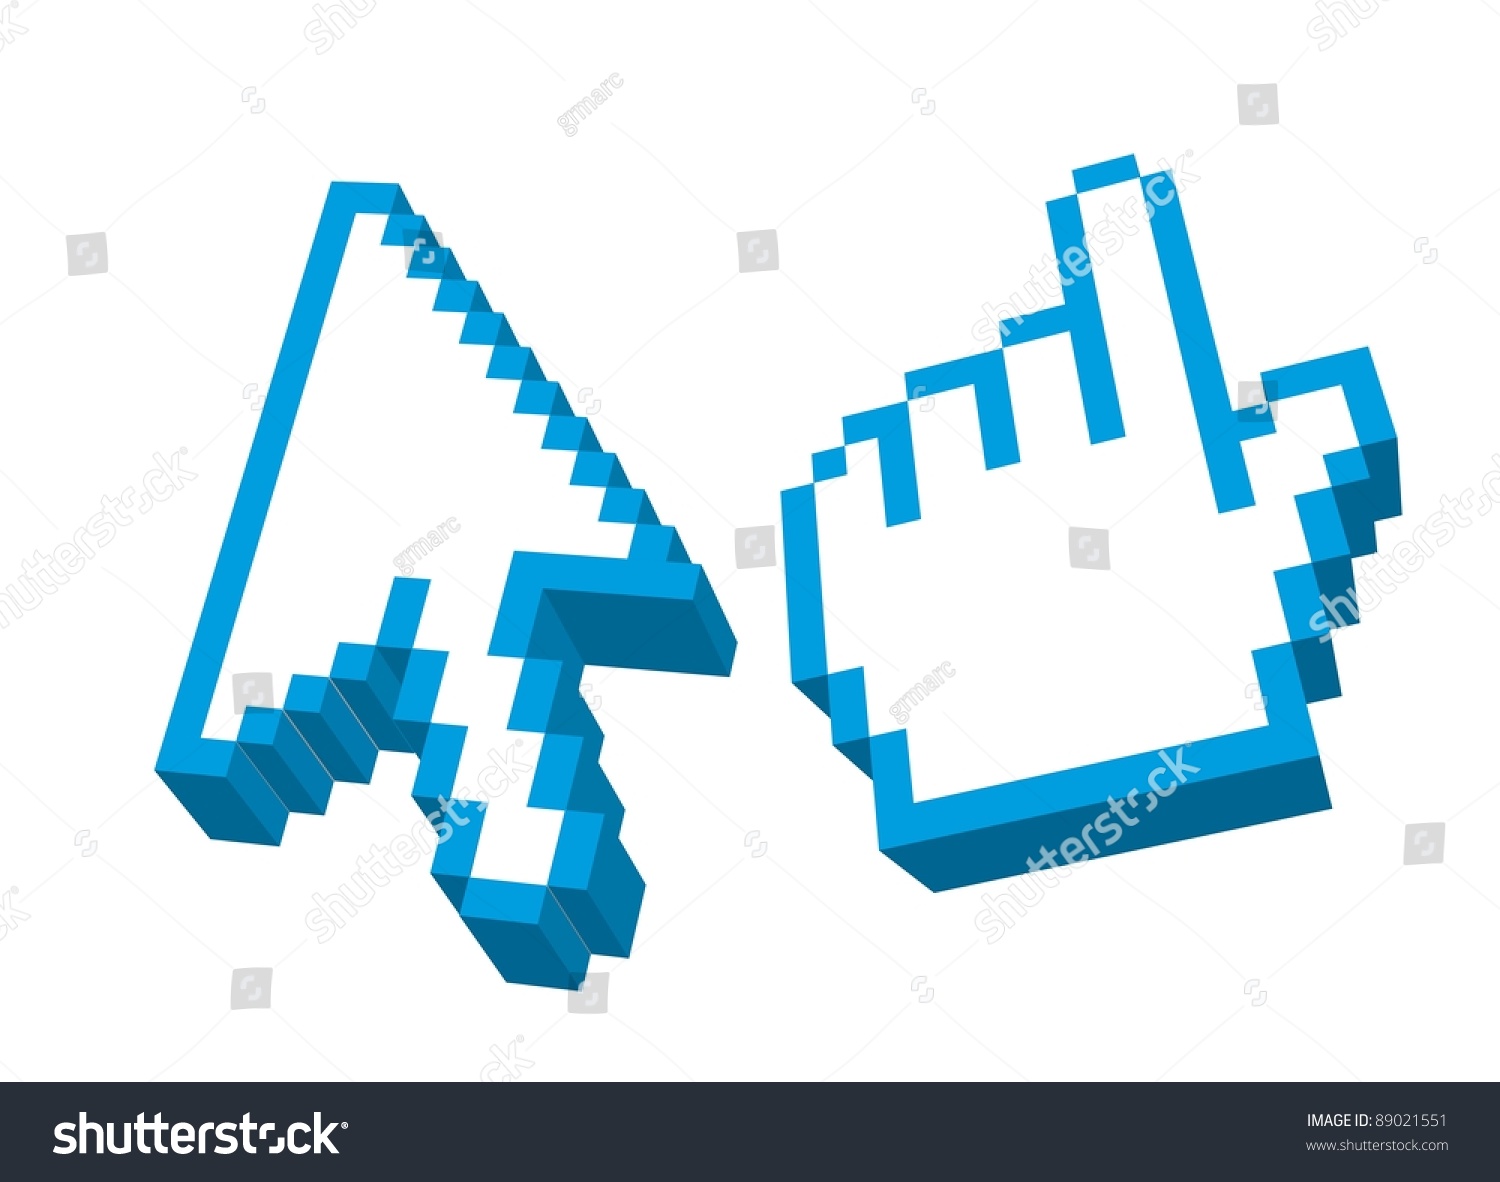 3d blue arrow and hand cursors isolated over white background. #89021551